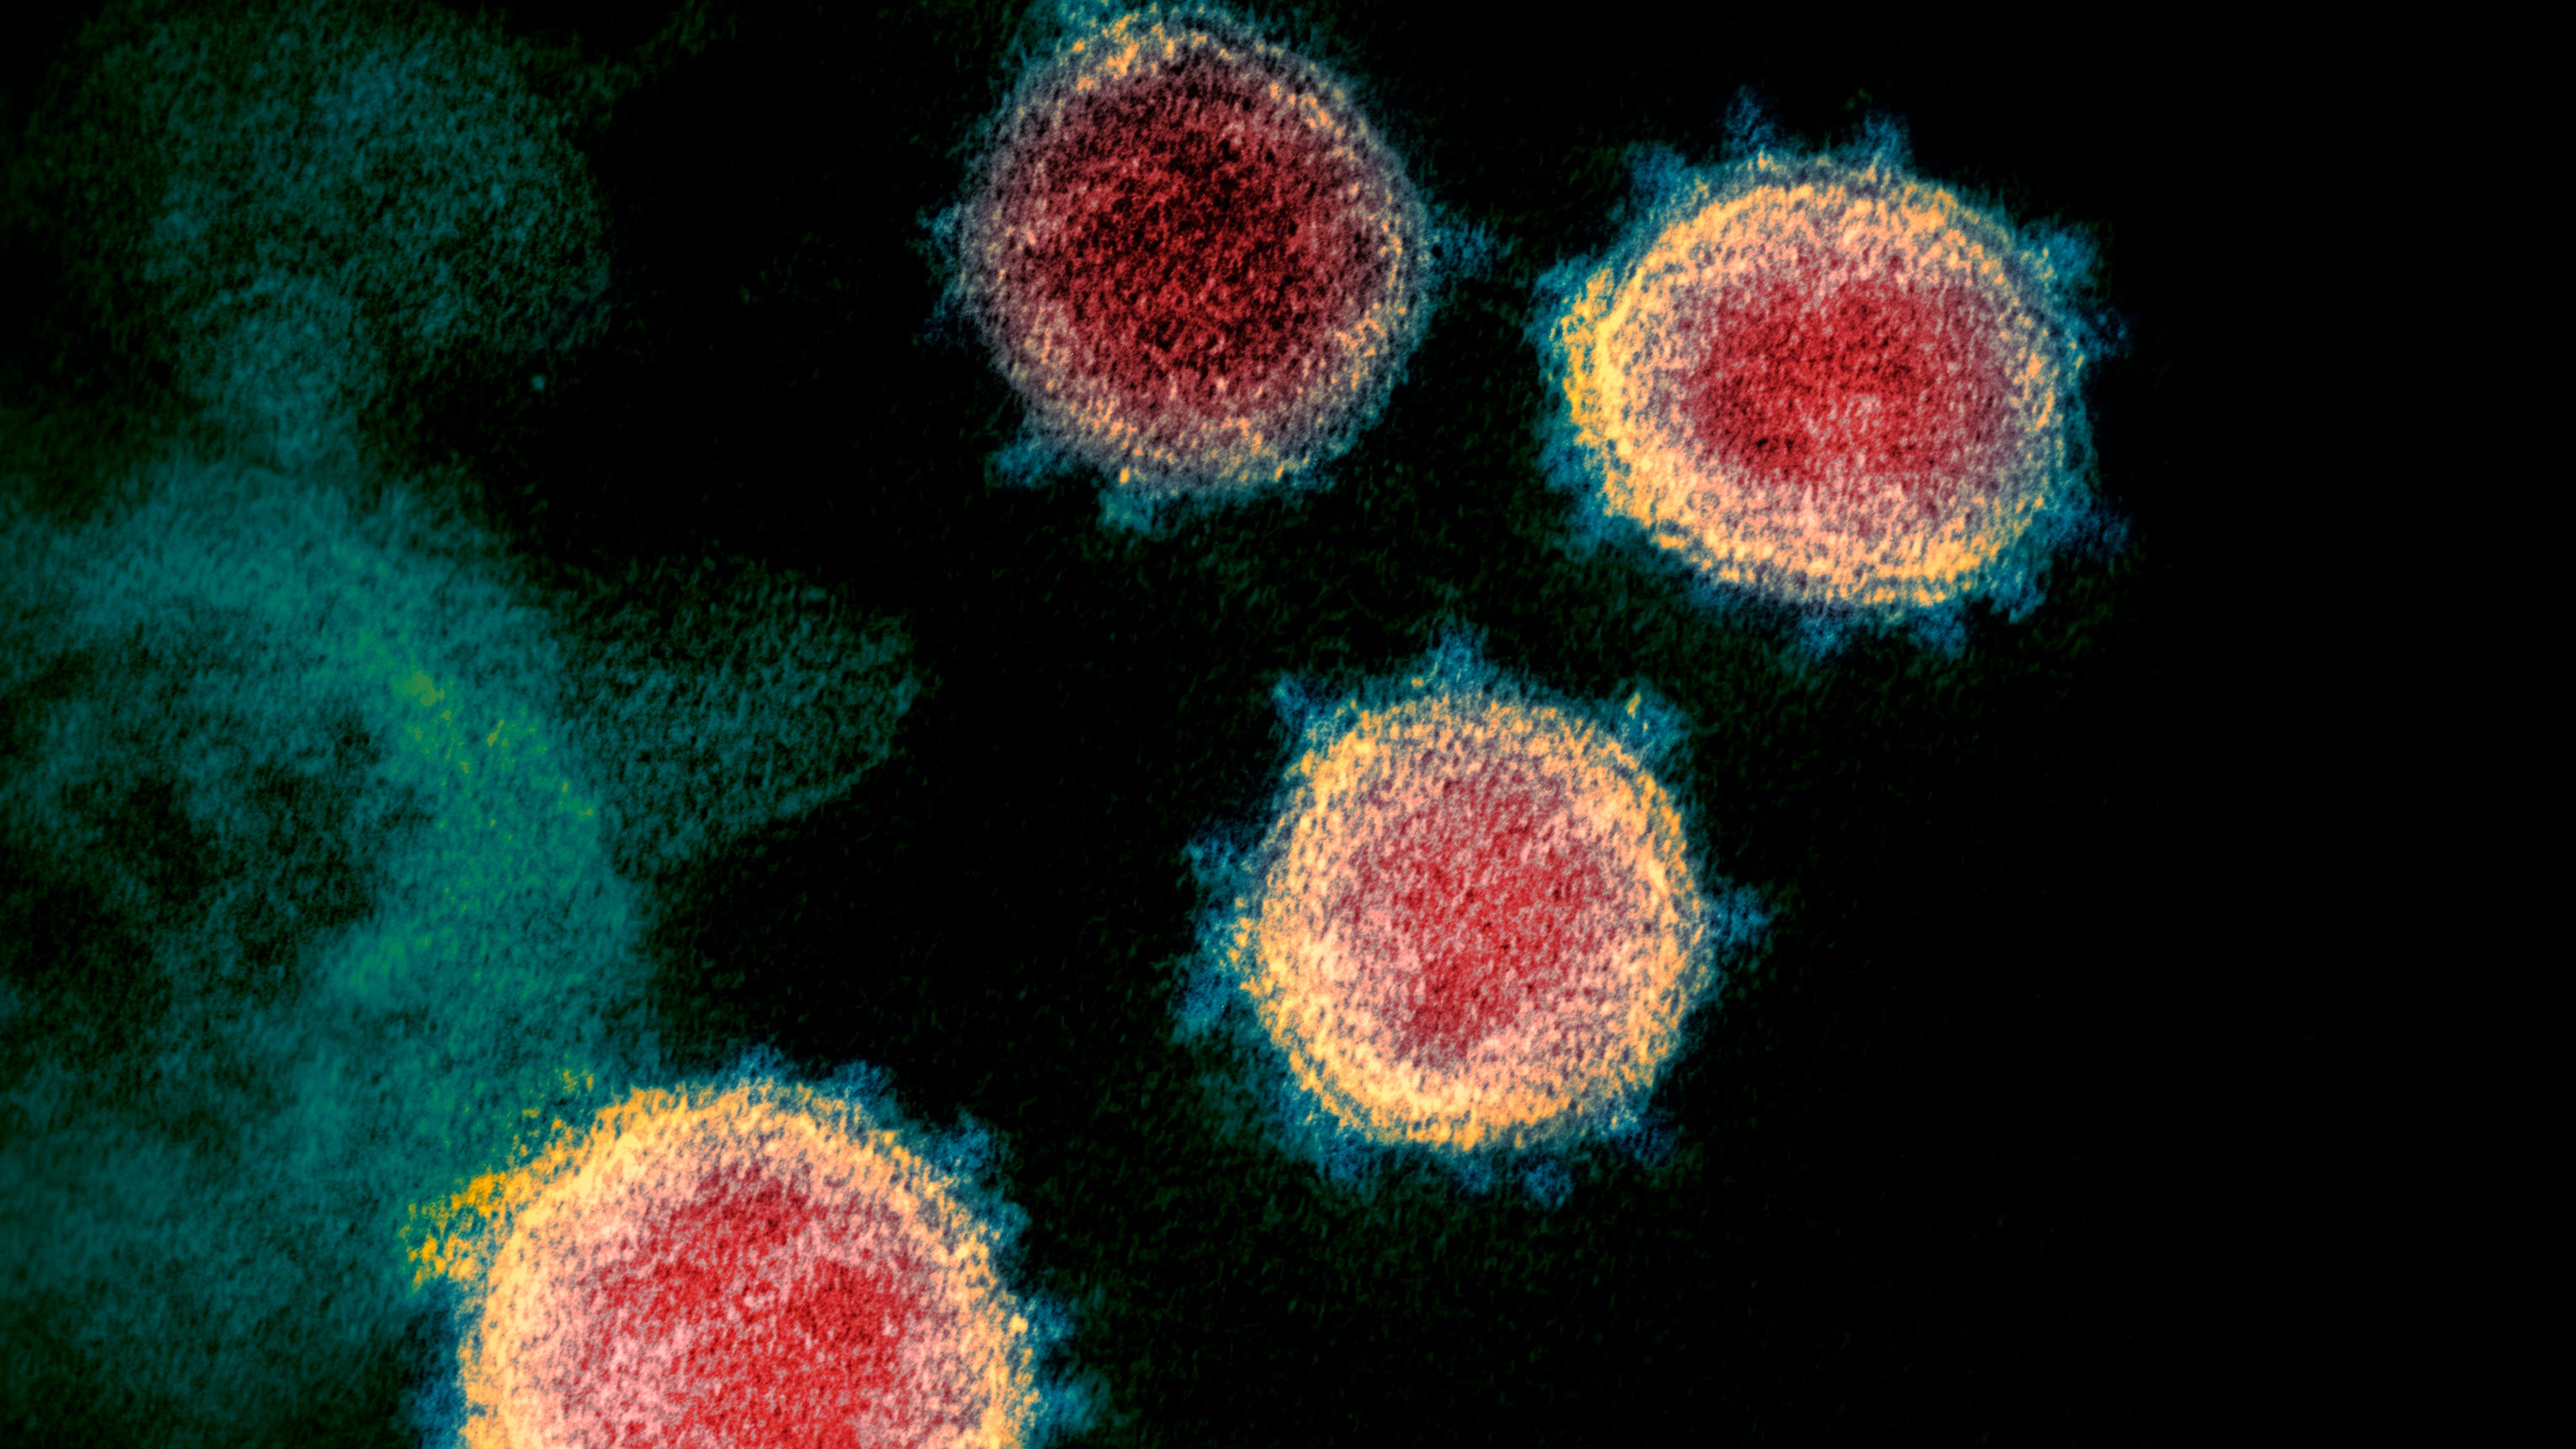 Statewide coronavirus update: Indiana reports 6,199 cases, 69 deaths